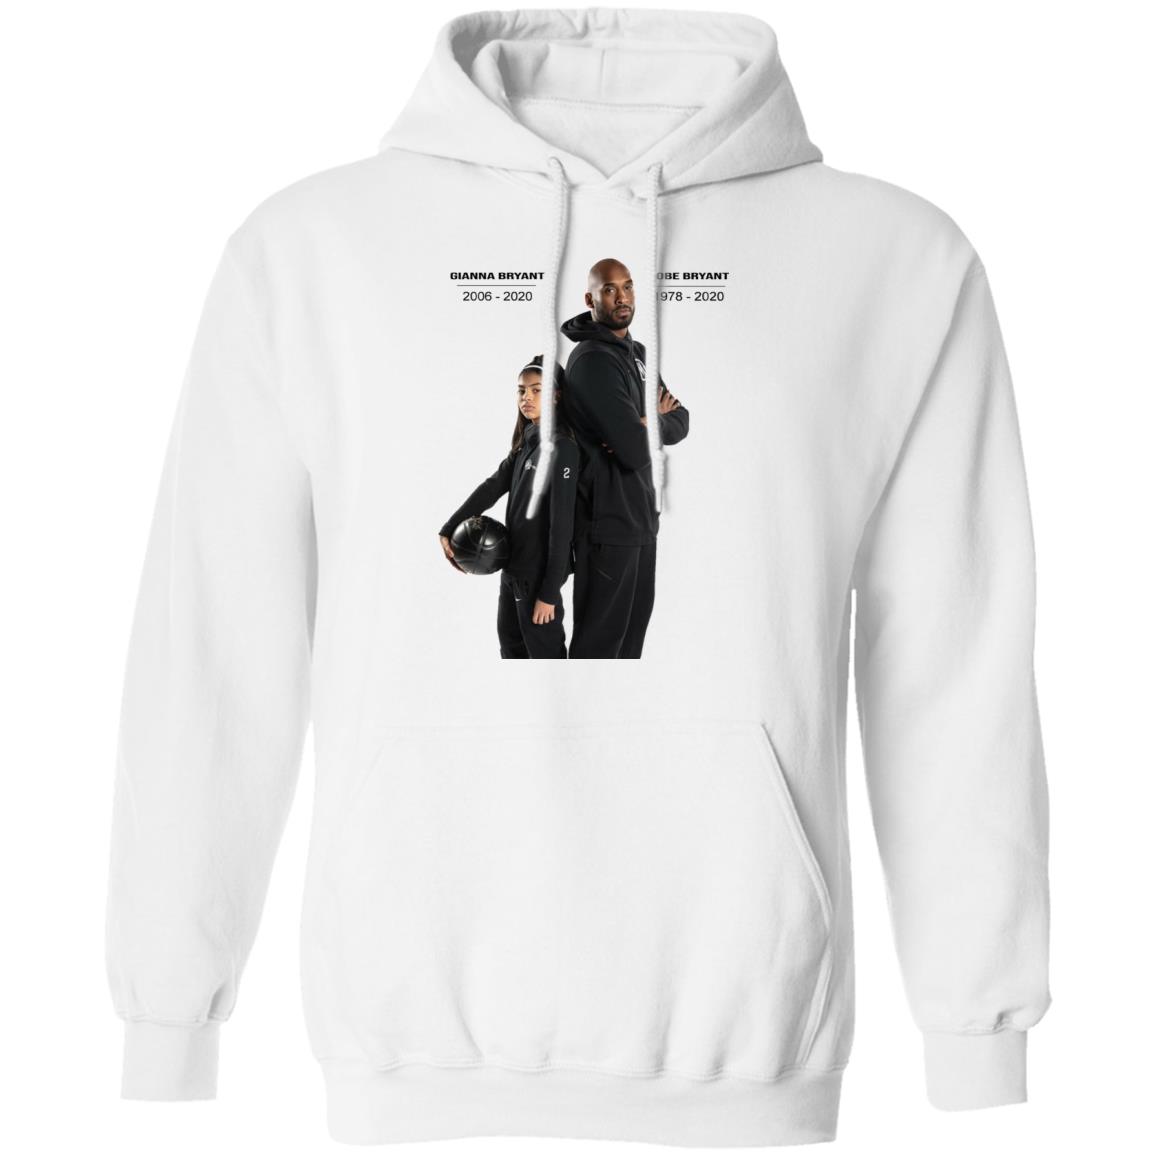 Forever Kobe and GiGi signature shirt, hoodie, tank top, sweater and long  sleeve t-shirt